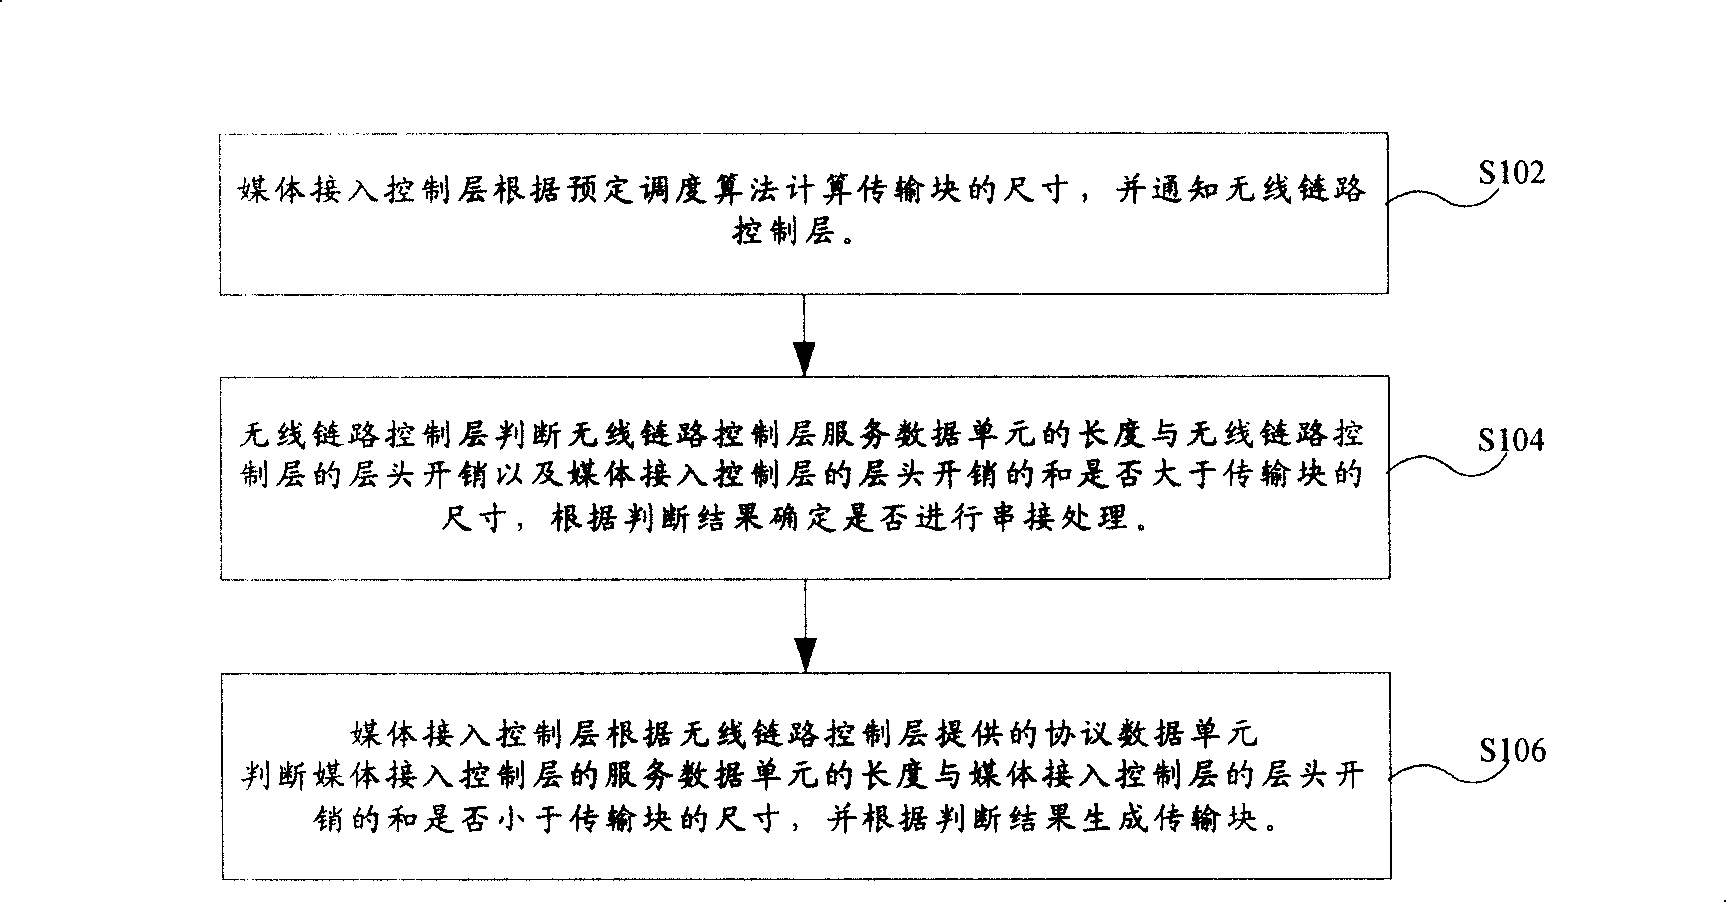 Series connection device for wireless links control layer service data unit